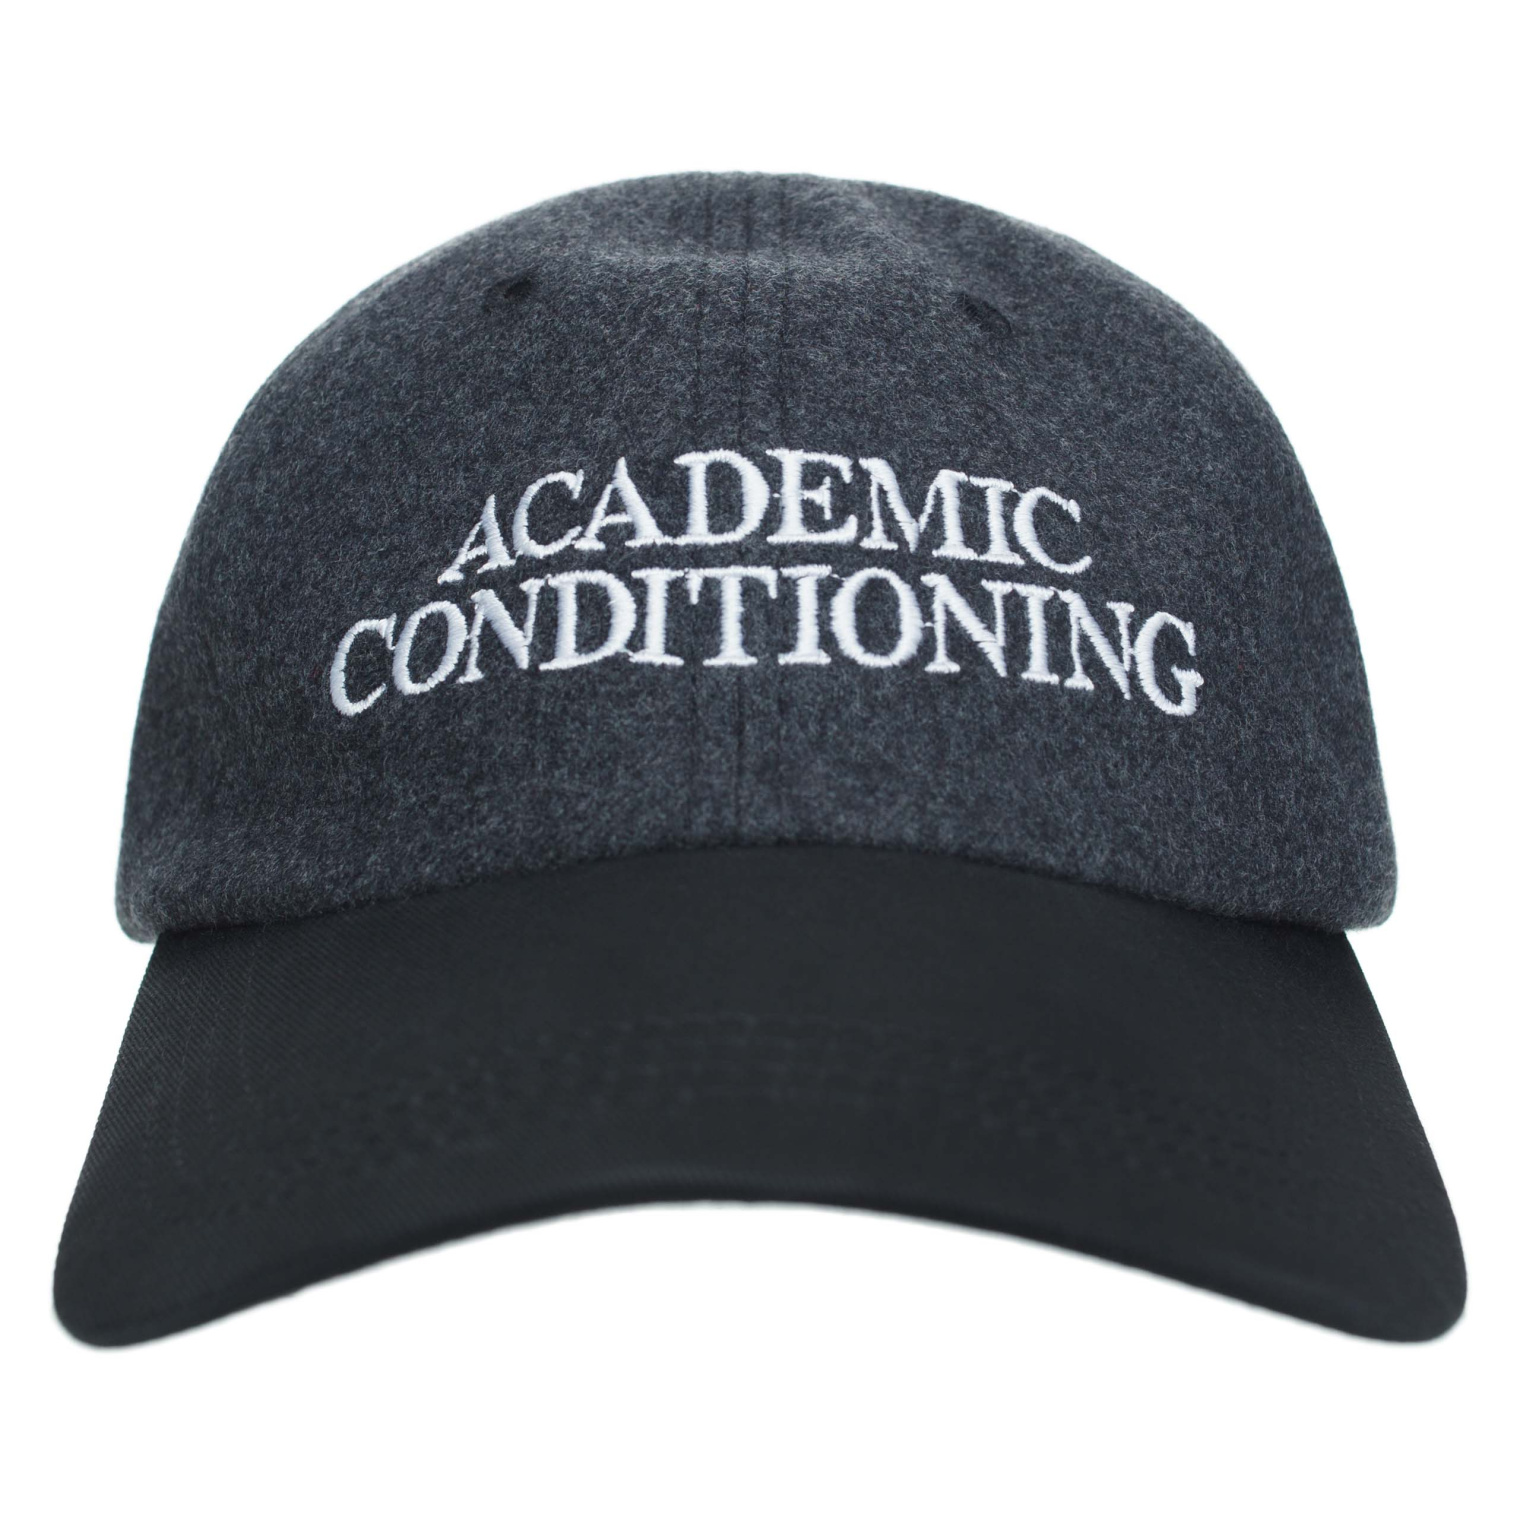 Enfants Riches Deprimes Academic Conditioning embroidered cap